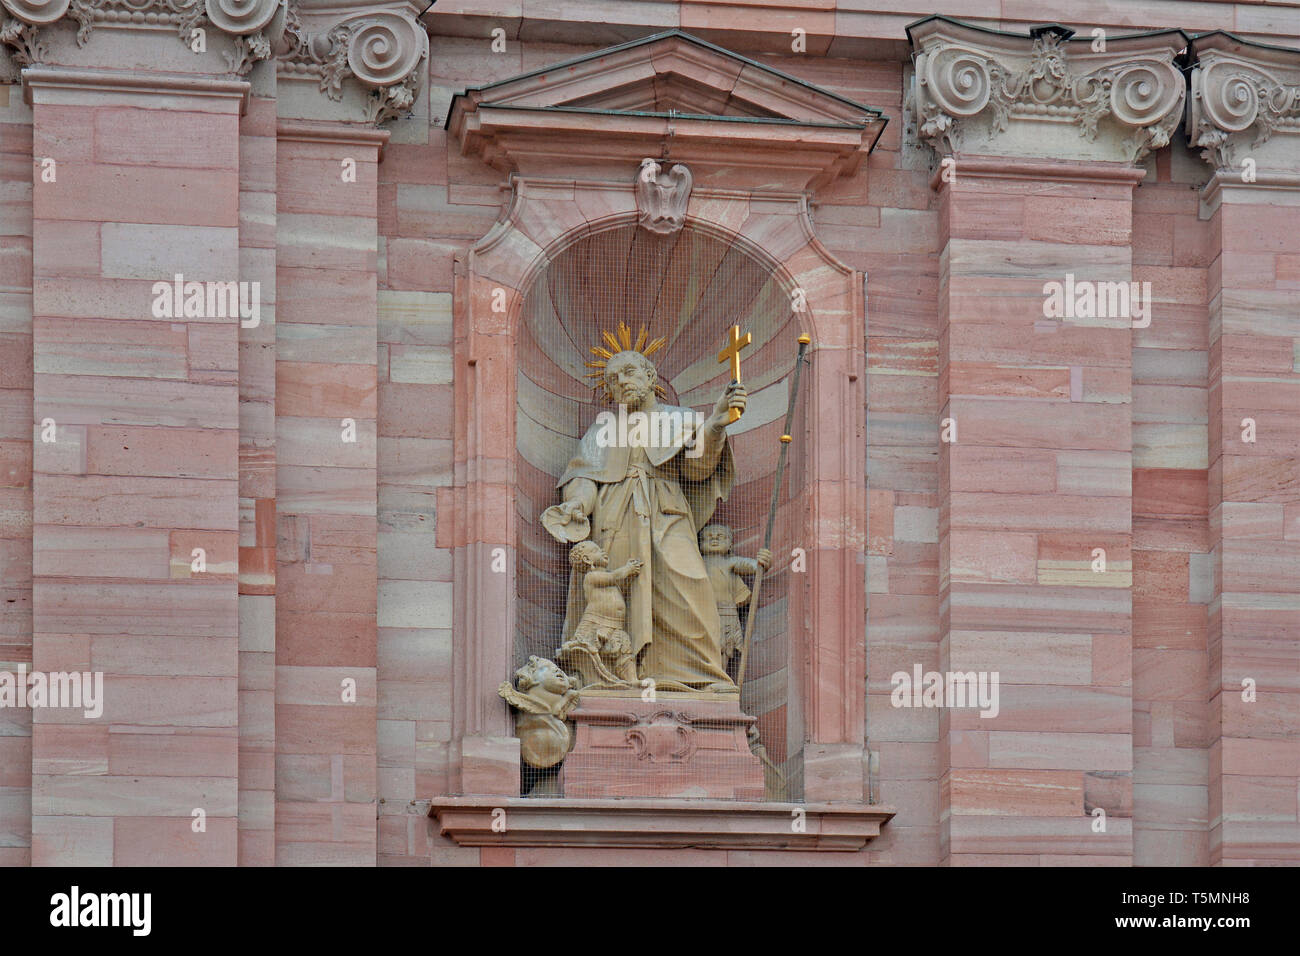 Statue of Saint Franz Xaver, holding a golden cross and baptizing a small boy and a second boy holds his staff at Jesuitenkirche church Stock Photo